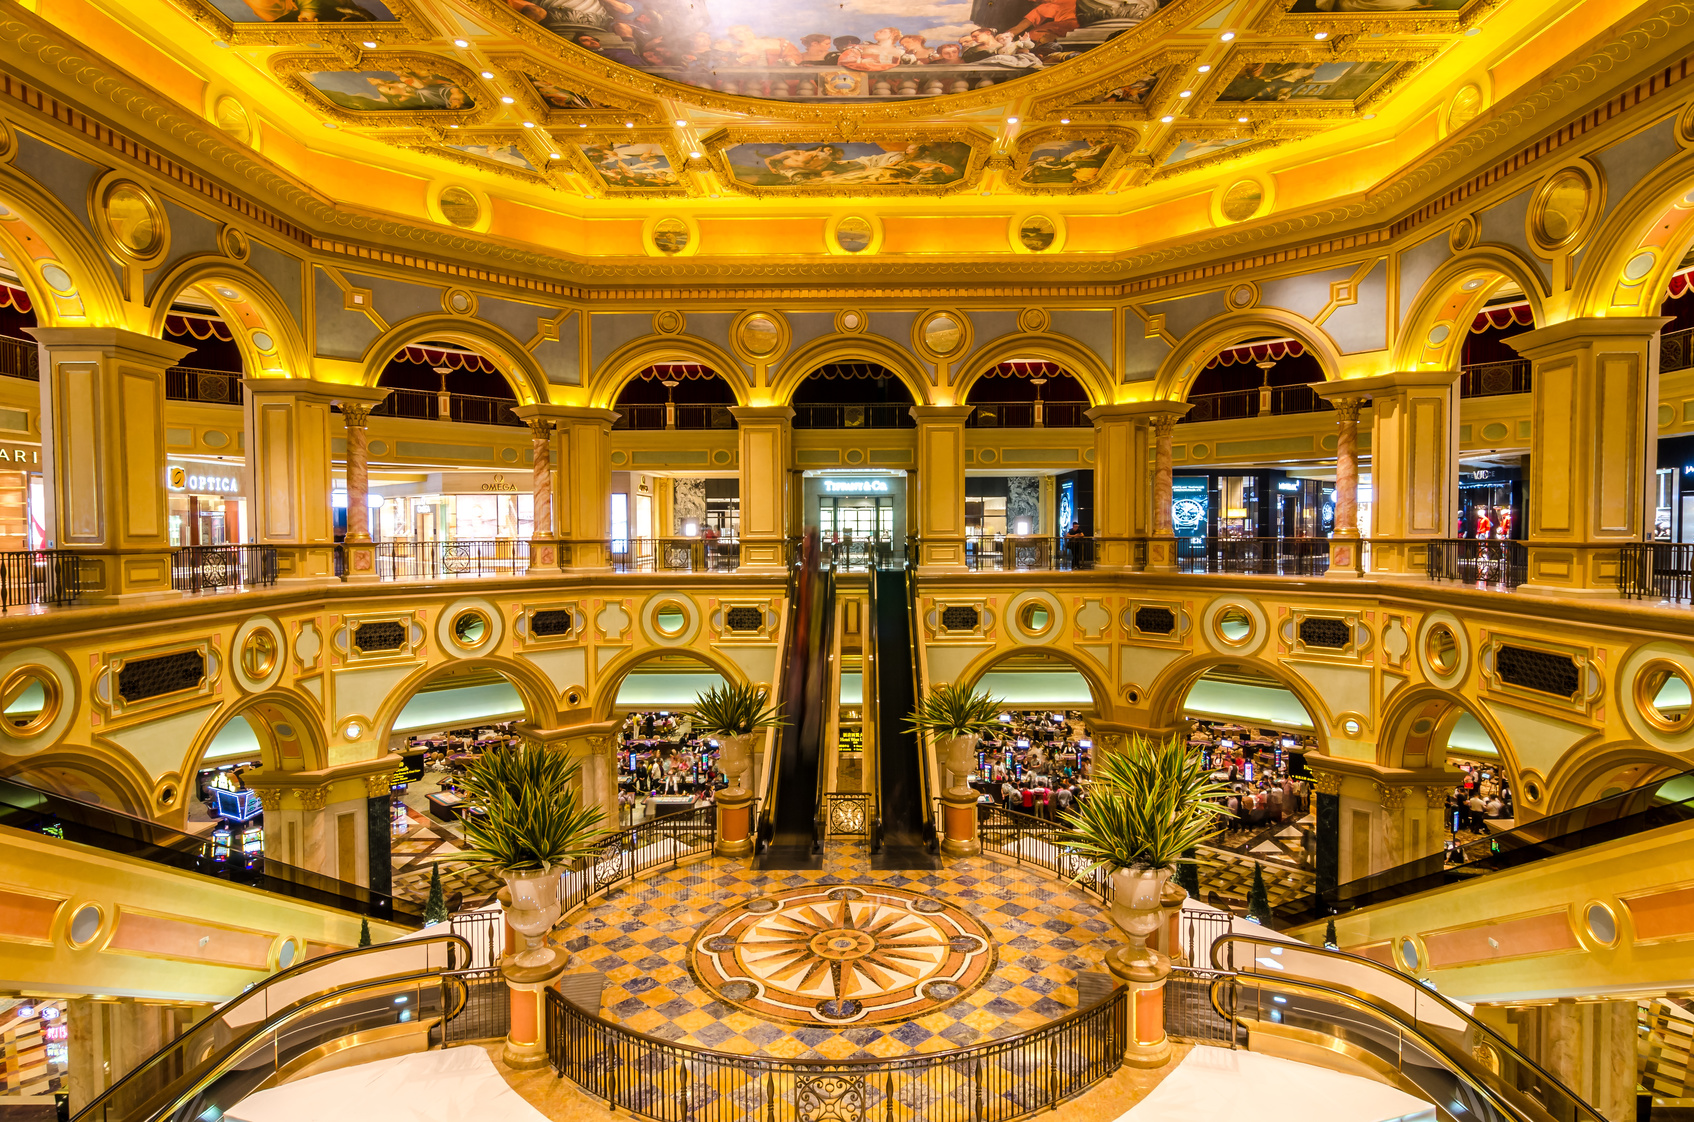 The Venetian Hotel, Macao - The famous shopping mall, luxury hot